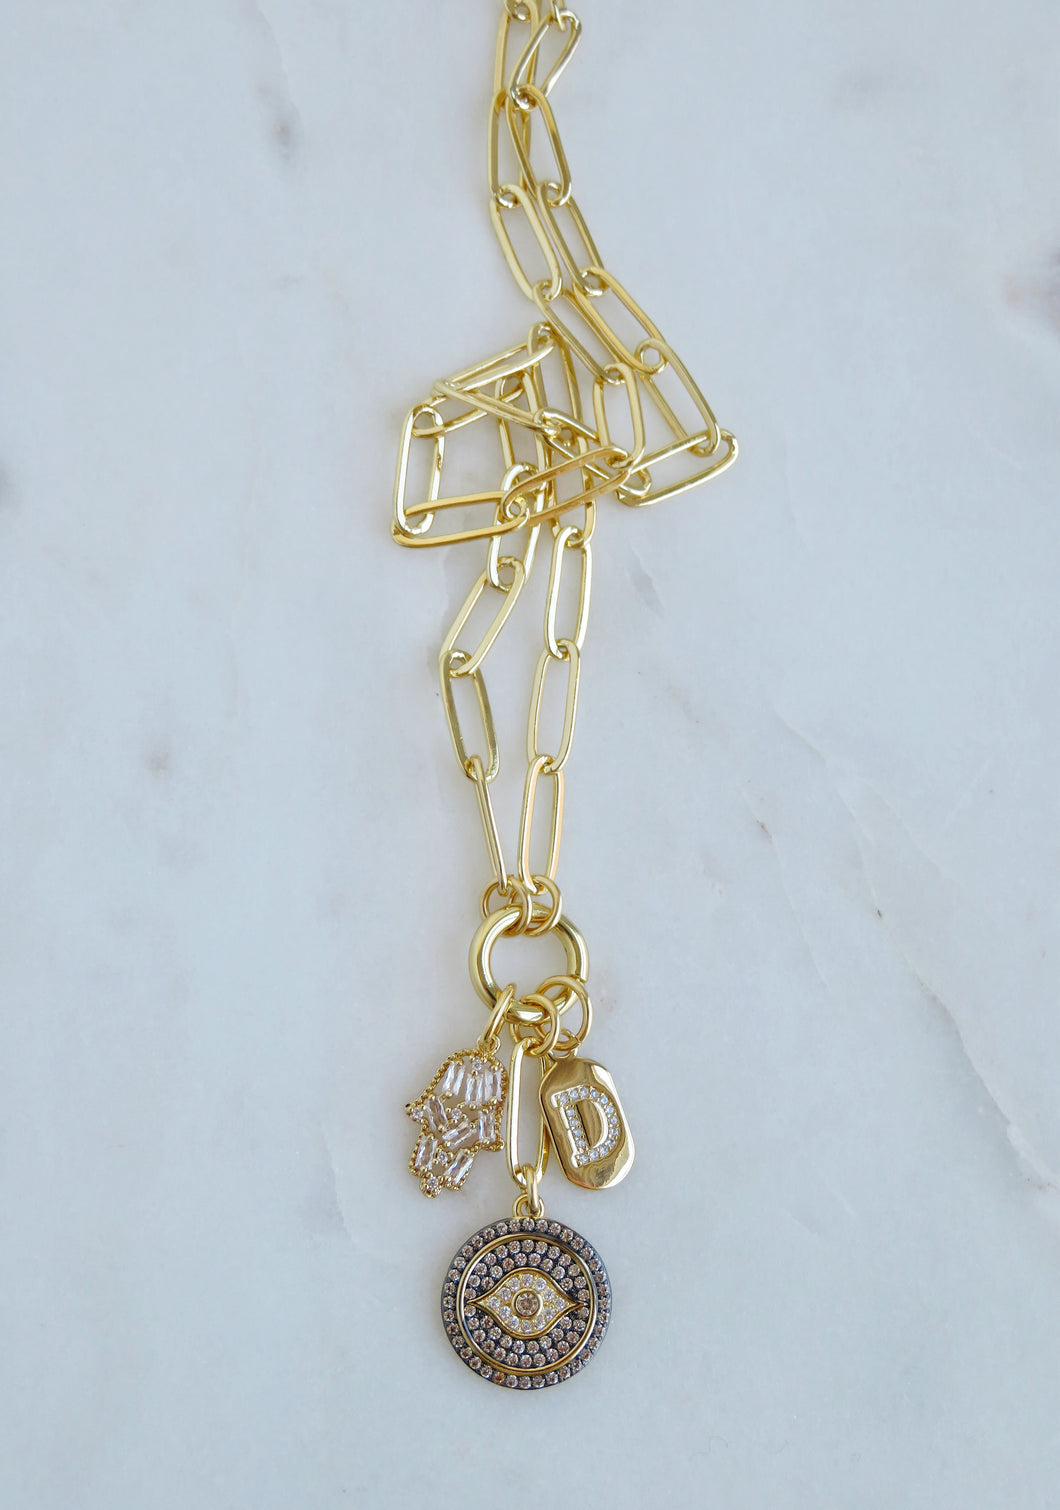 Luck. Protection & Goodness Charm Cluster - Clip